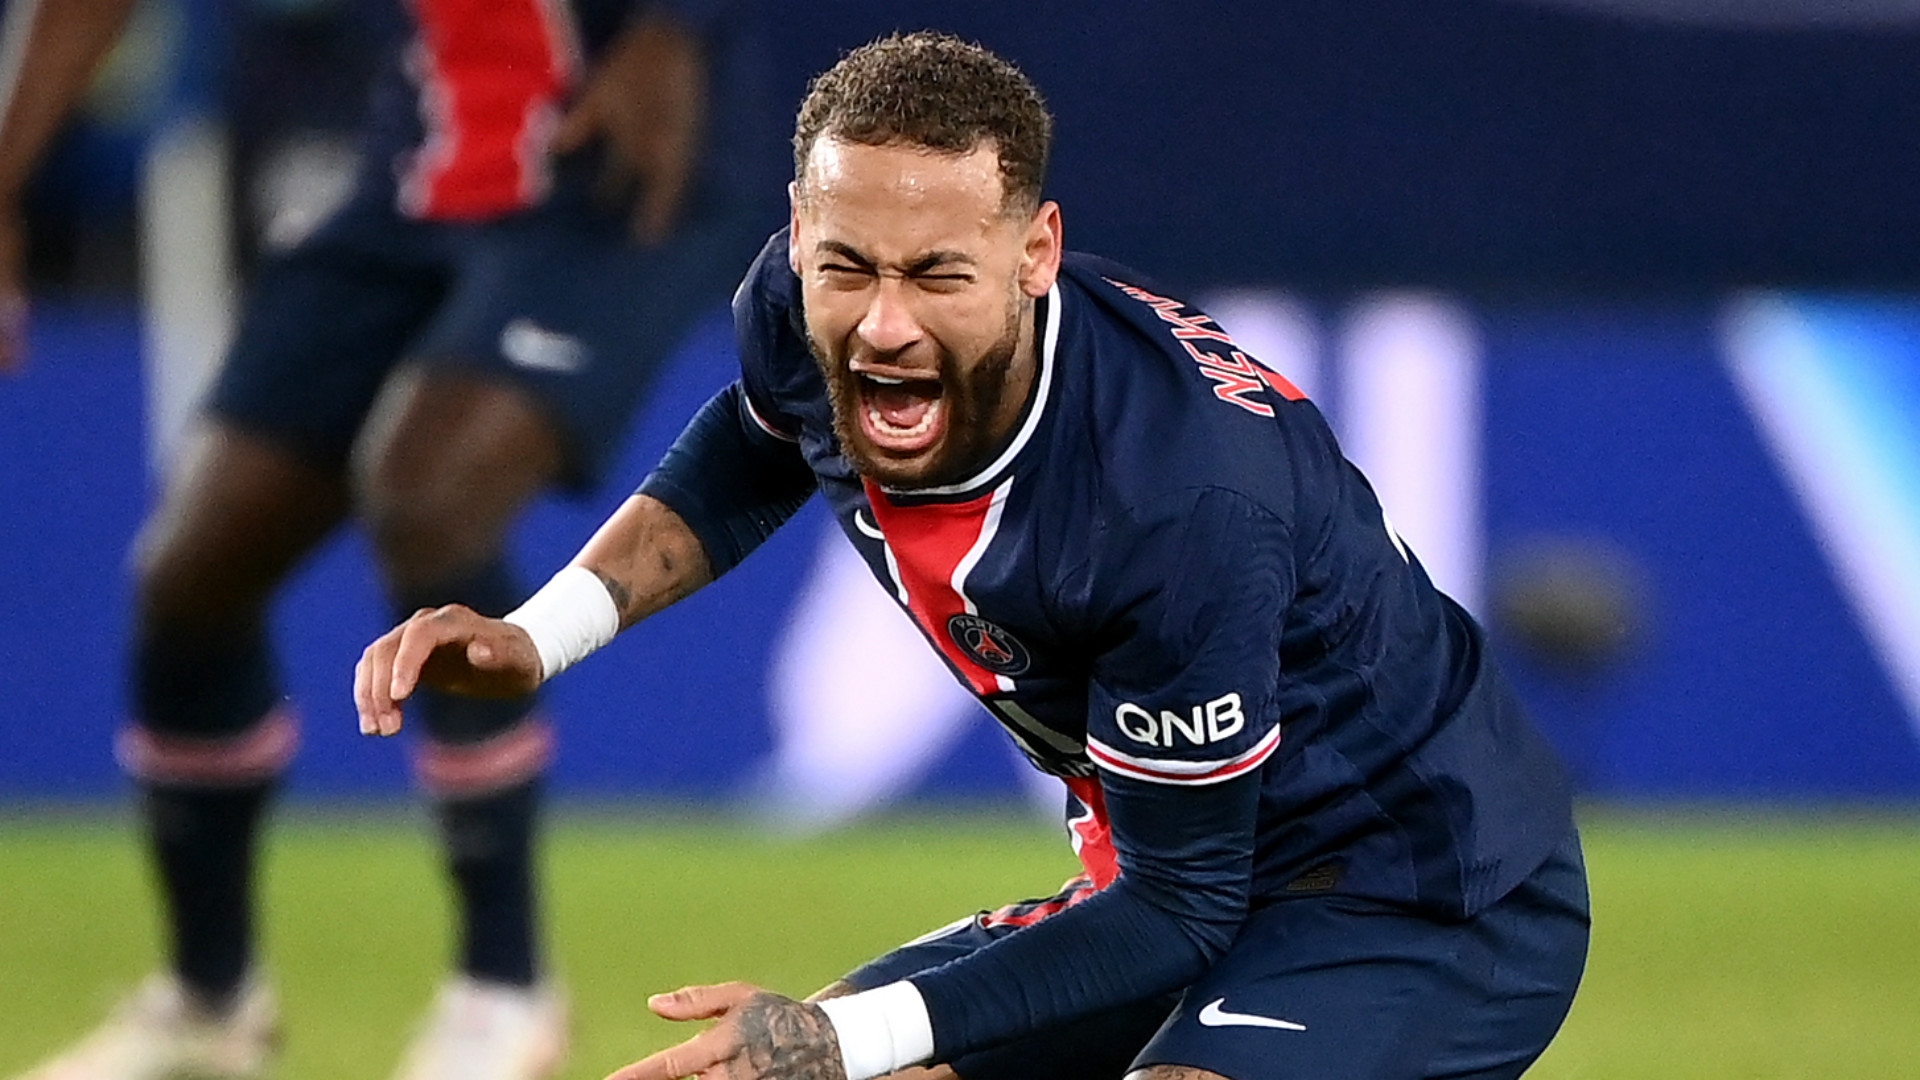 Neymar to miss Barcelona reunion in Champions League as PSG take no risks on Brazilian's fitness